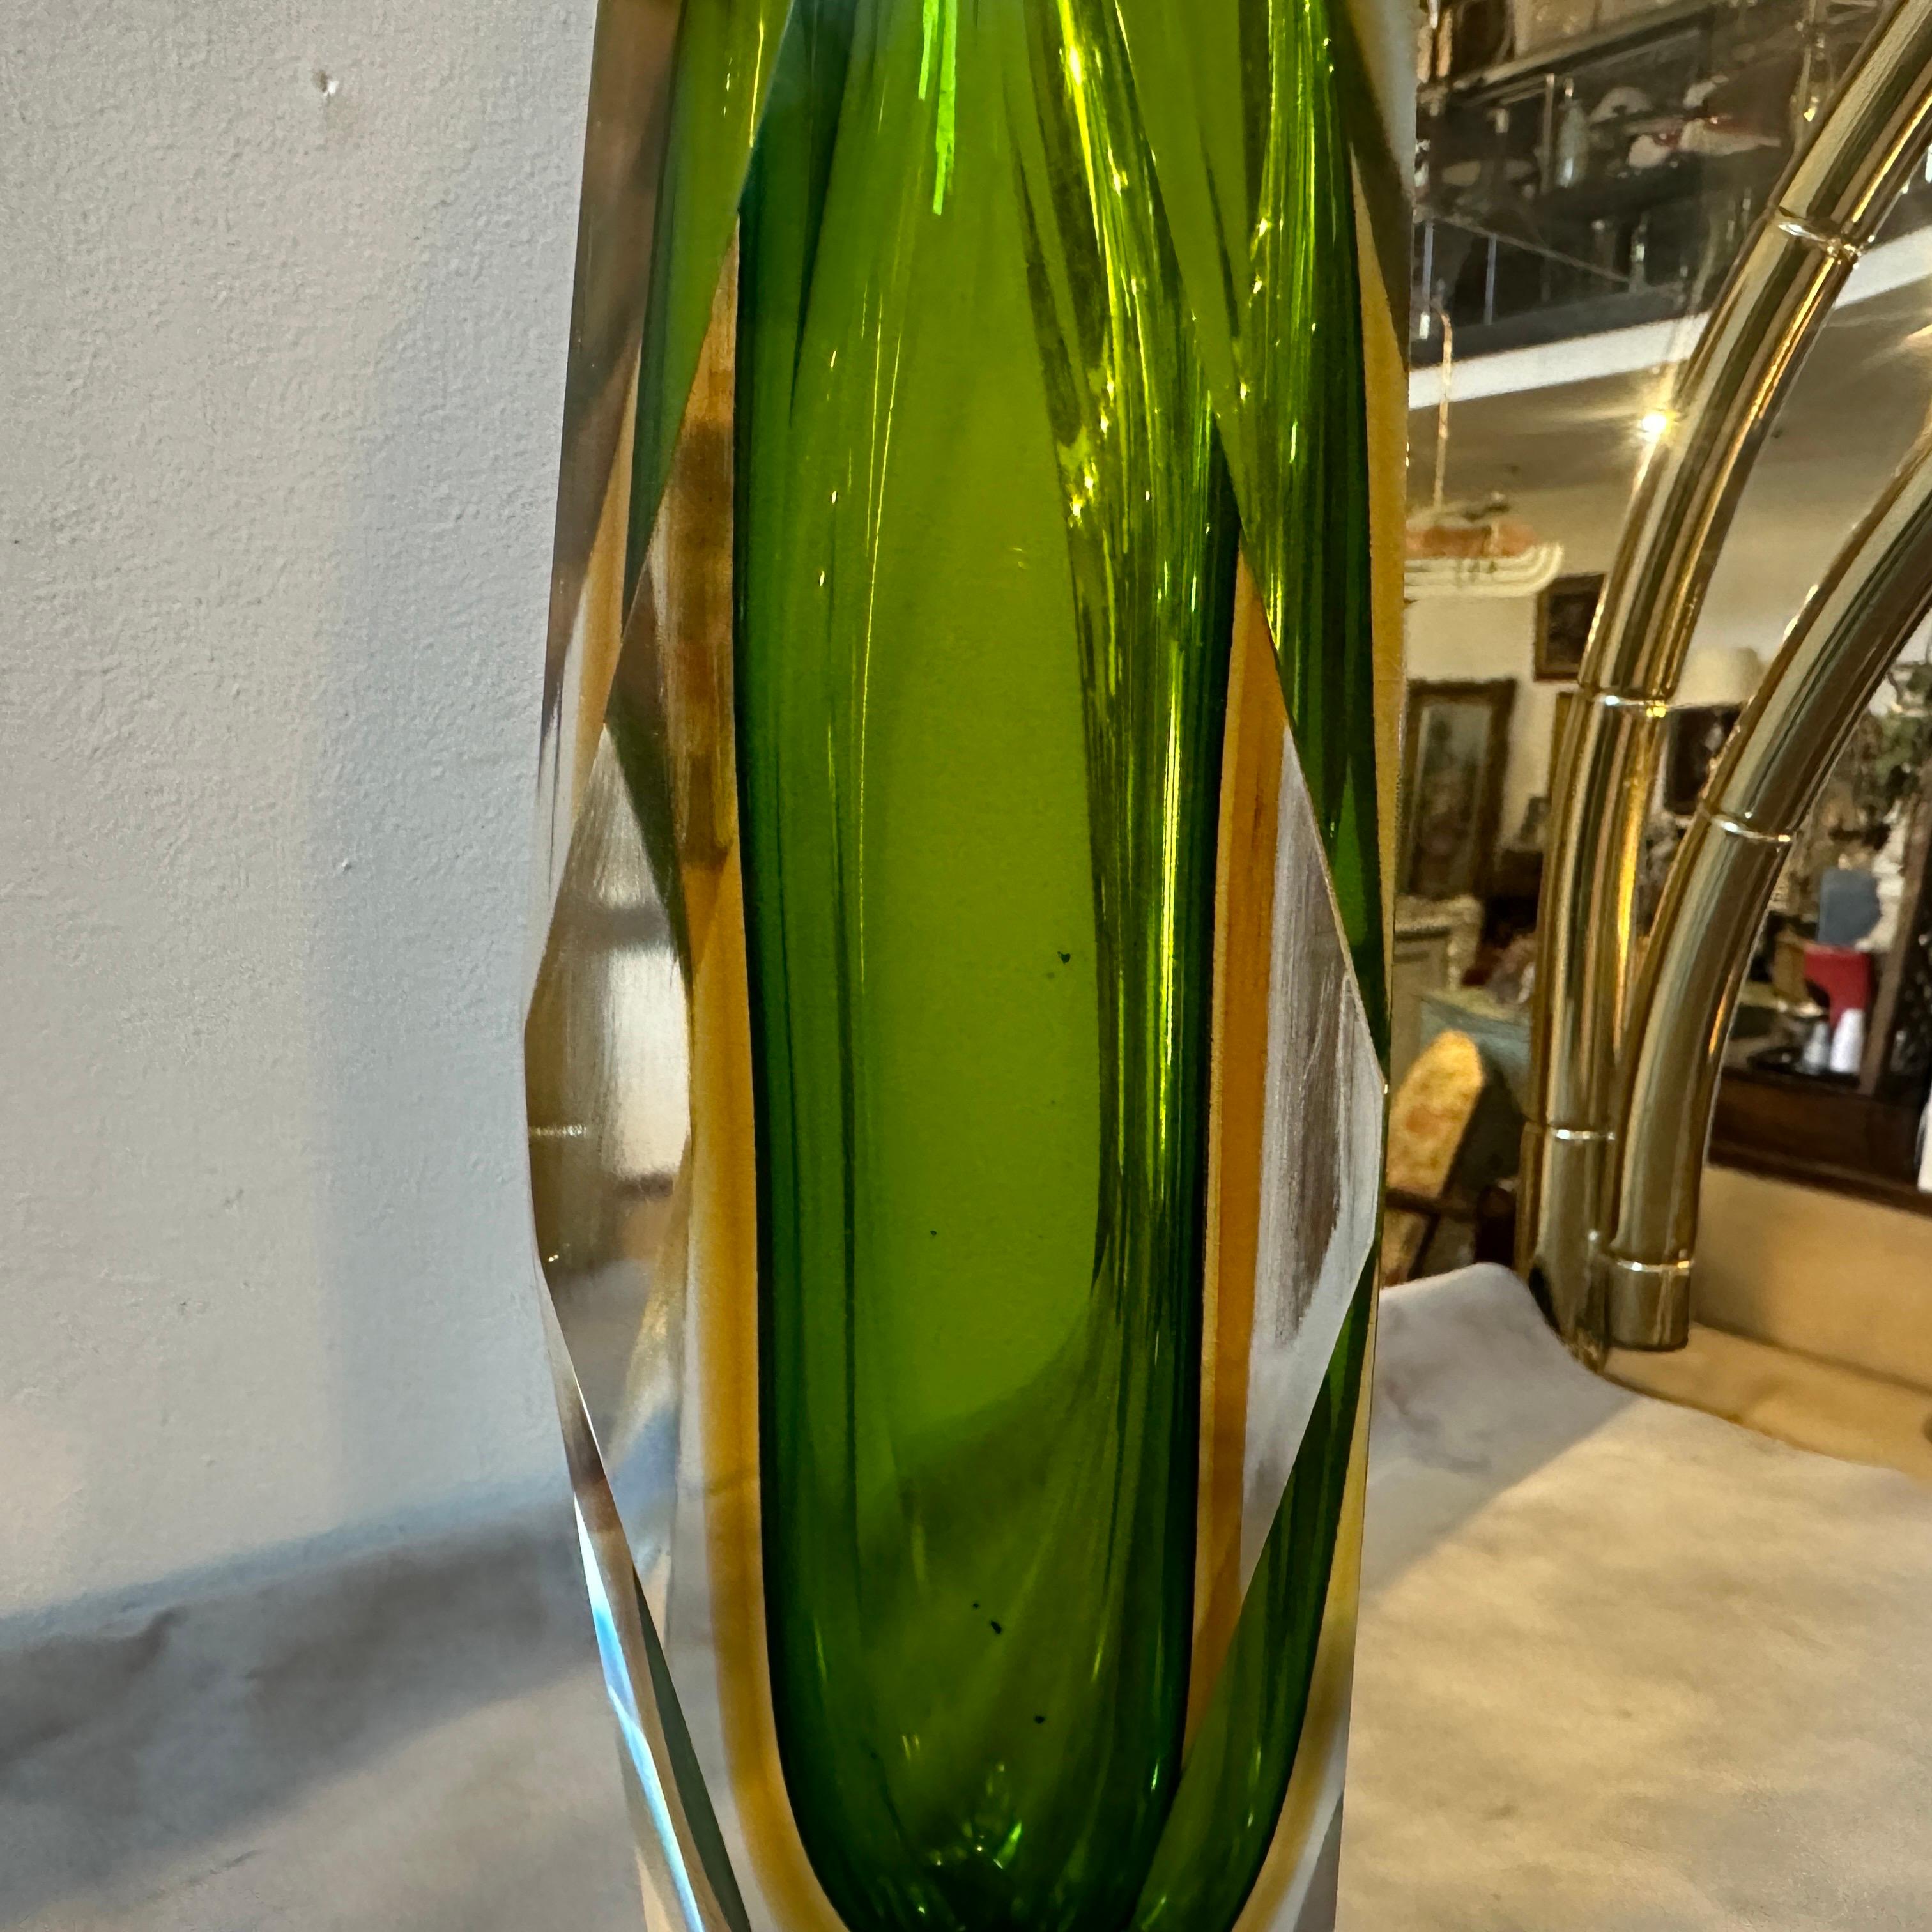 1960s Mid-Century Modern Green and Yellow Faceted Sommerso Murano Glass Vase For Sale 1